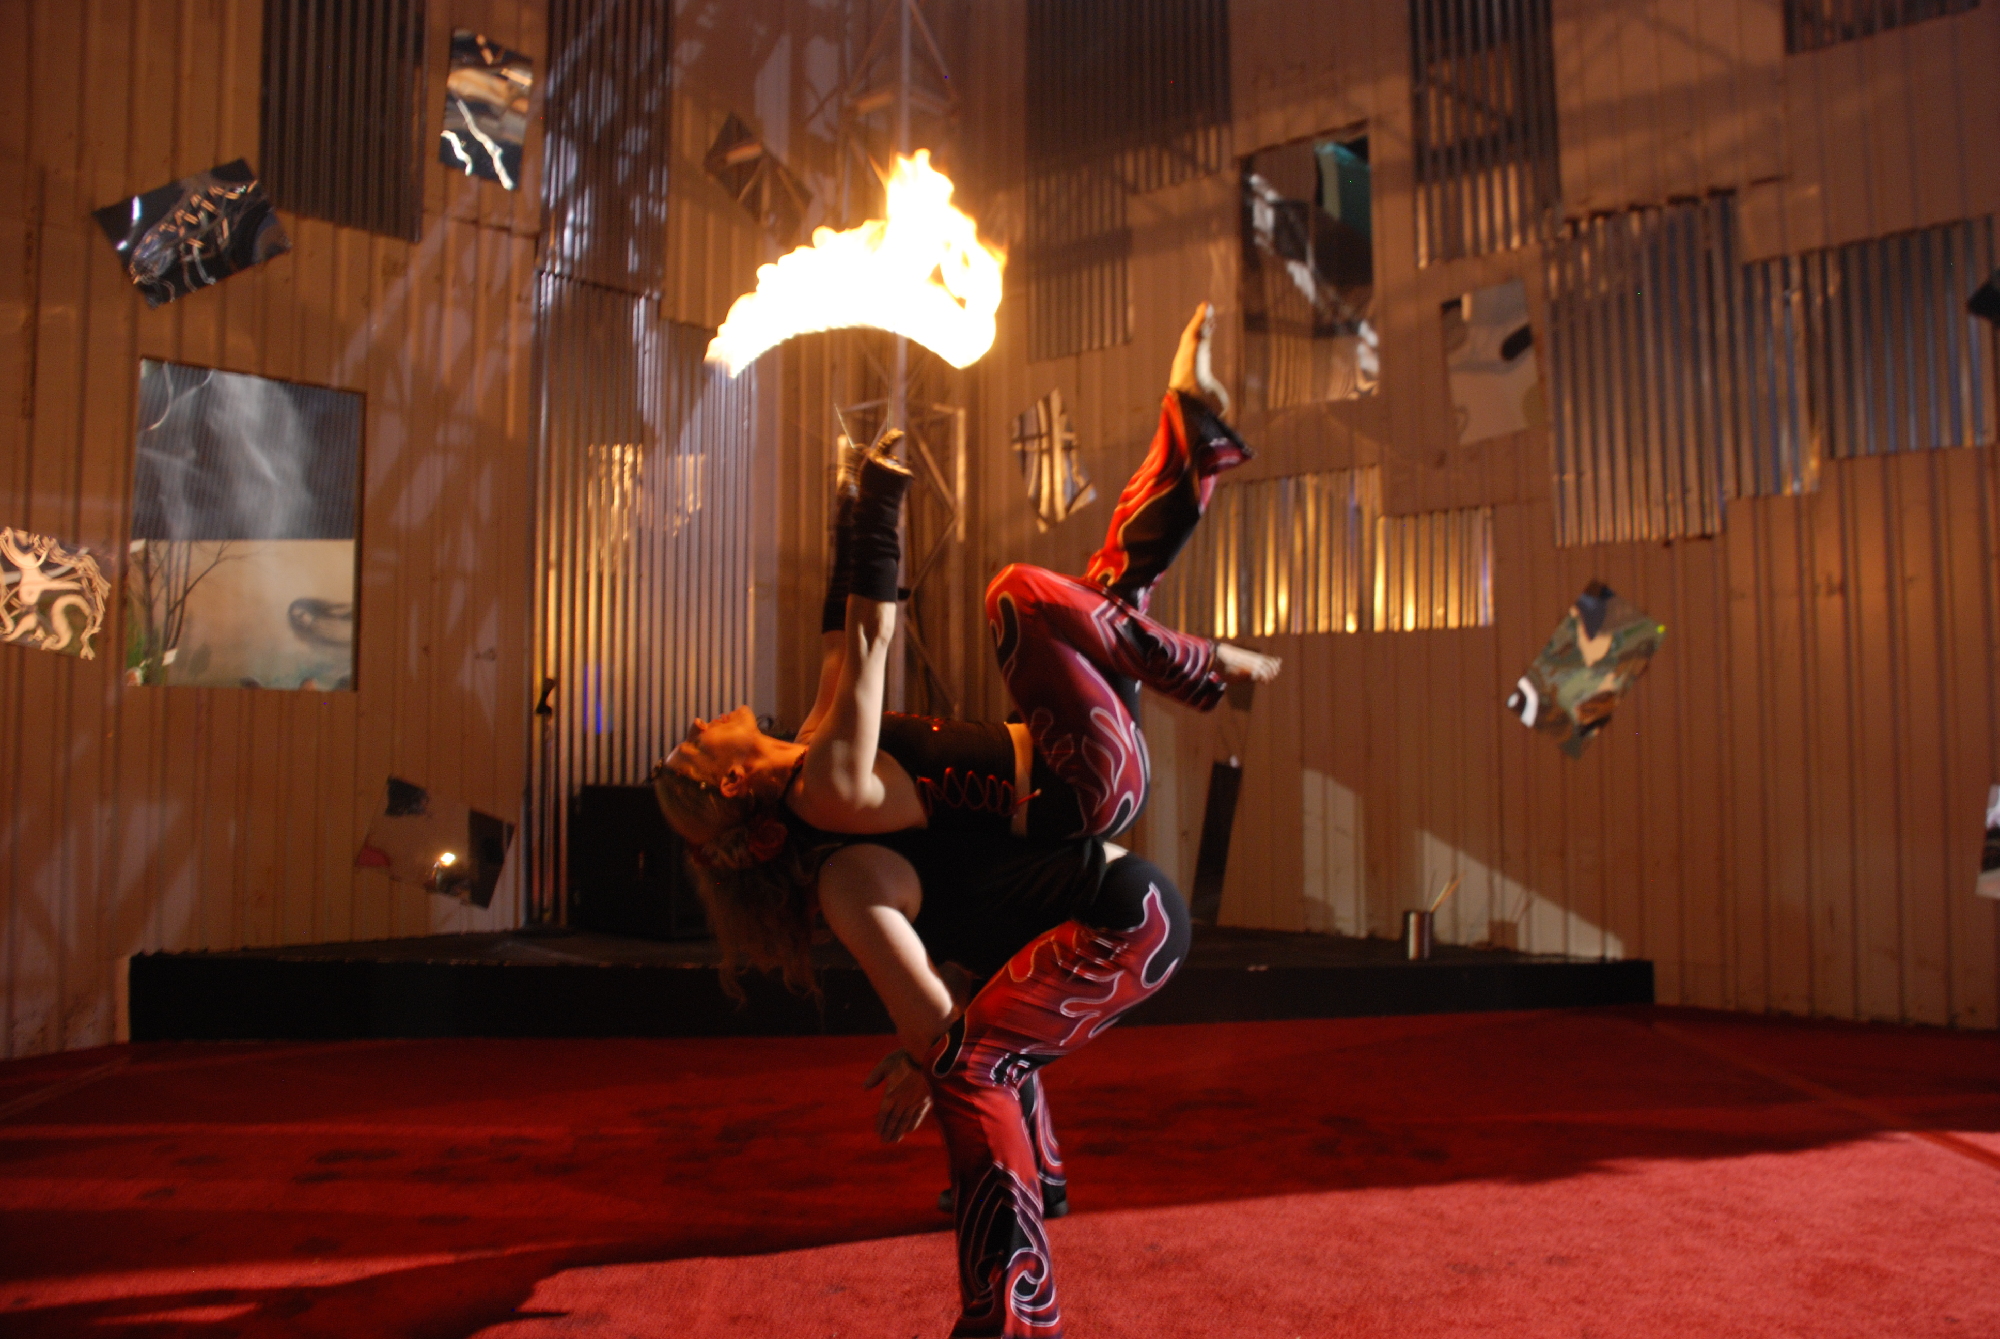 Fire Acrobat Acts: At the Circus in your Own Backyard | Fire Pixie